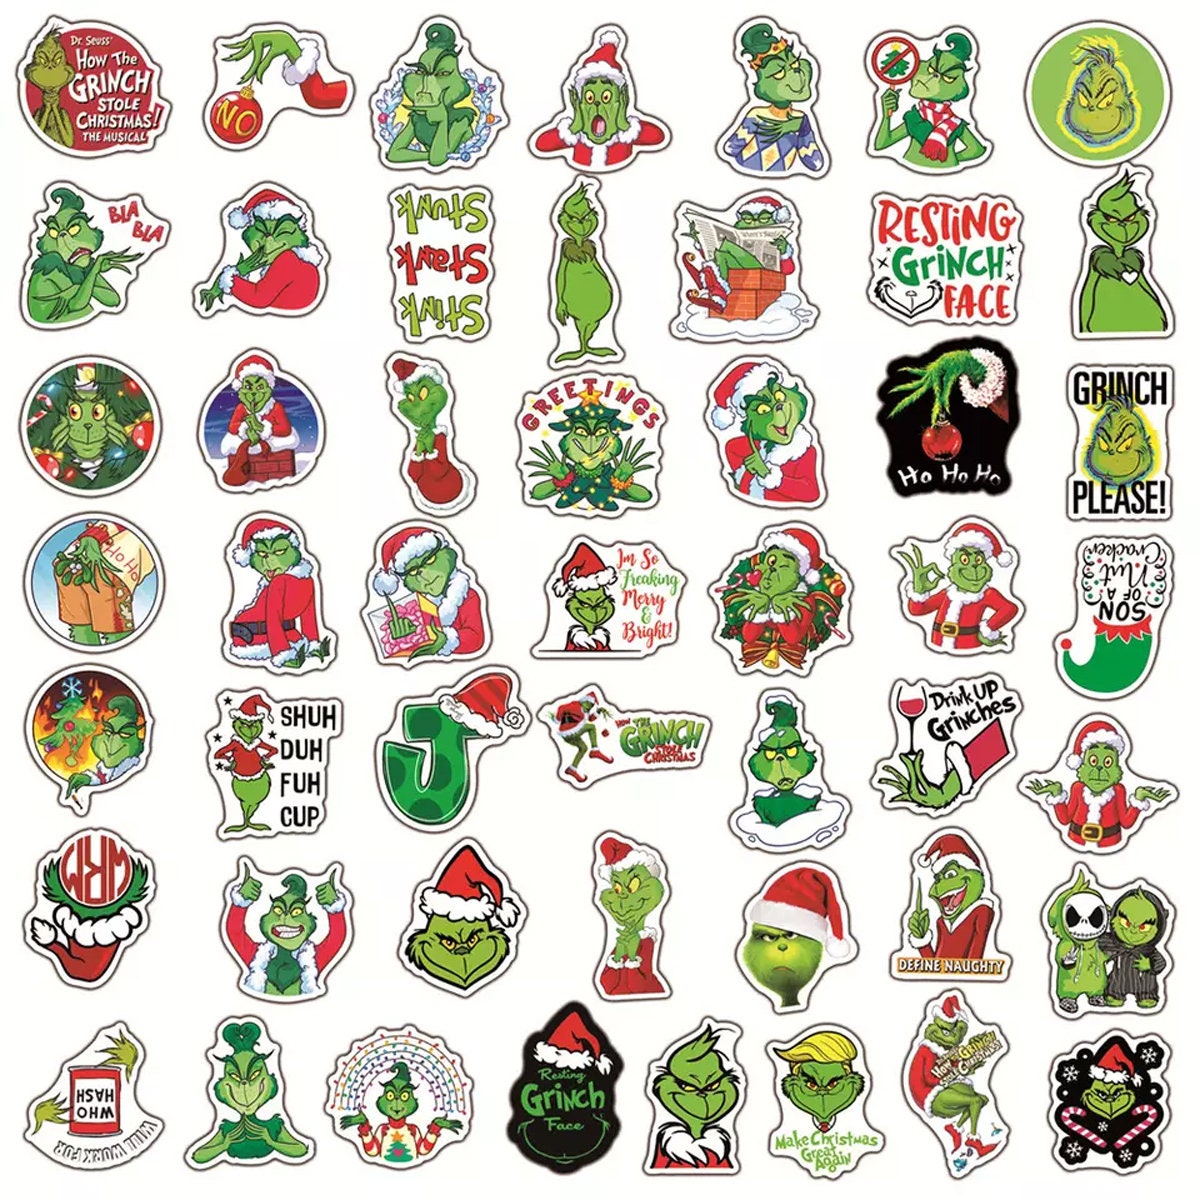 The Grinch Sticker Pack - Culture of Gaming